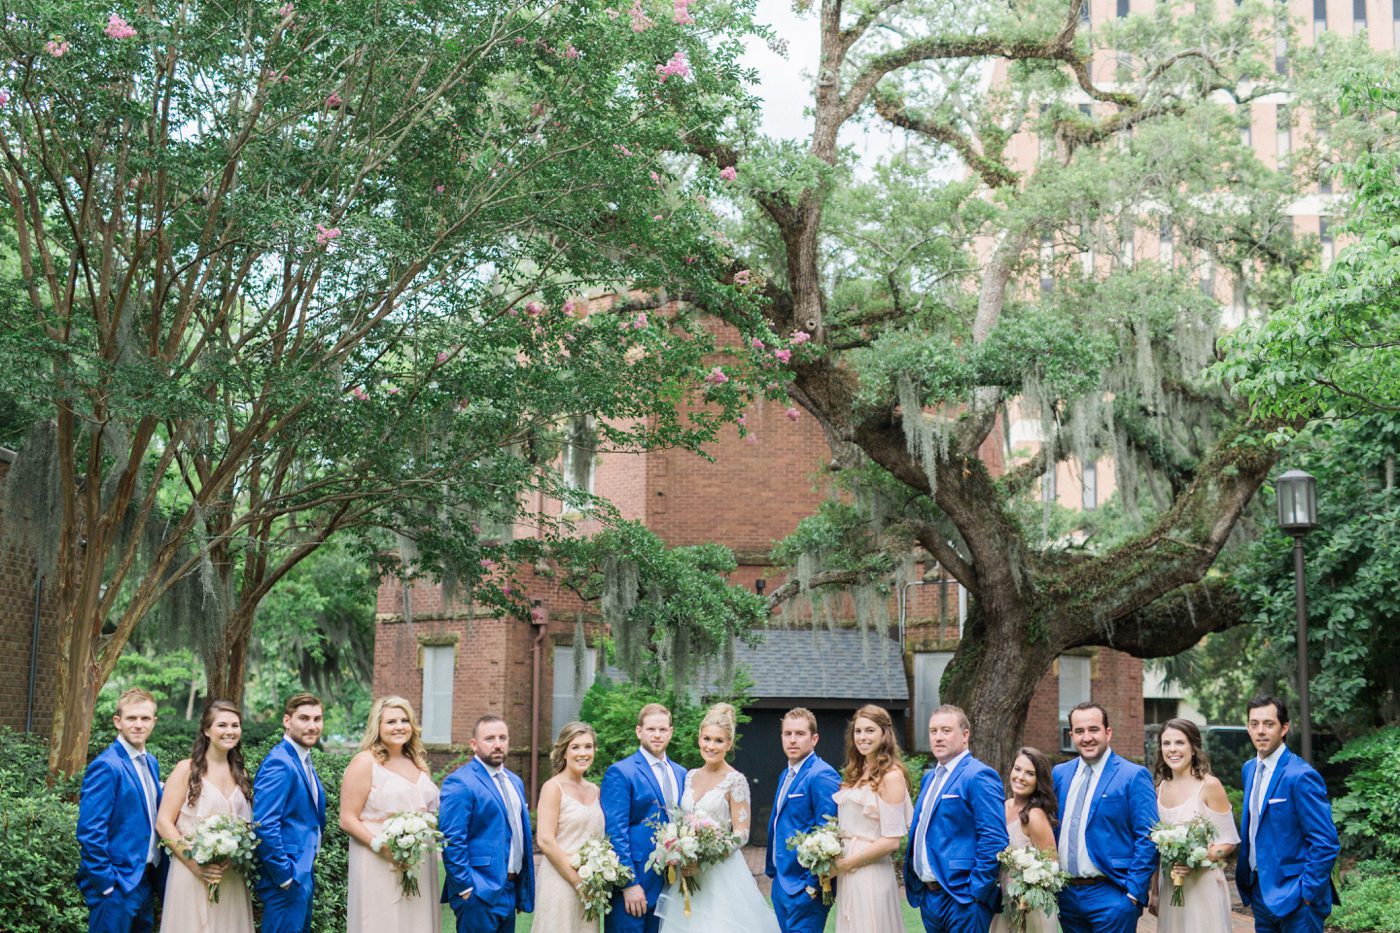 Bridal party photo under oak trees and spanish moss in Charleston. Photo by Catherine Ann Photography